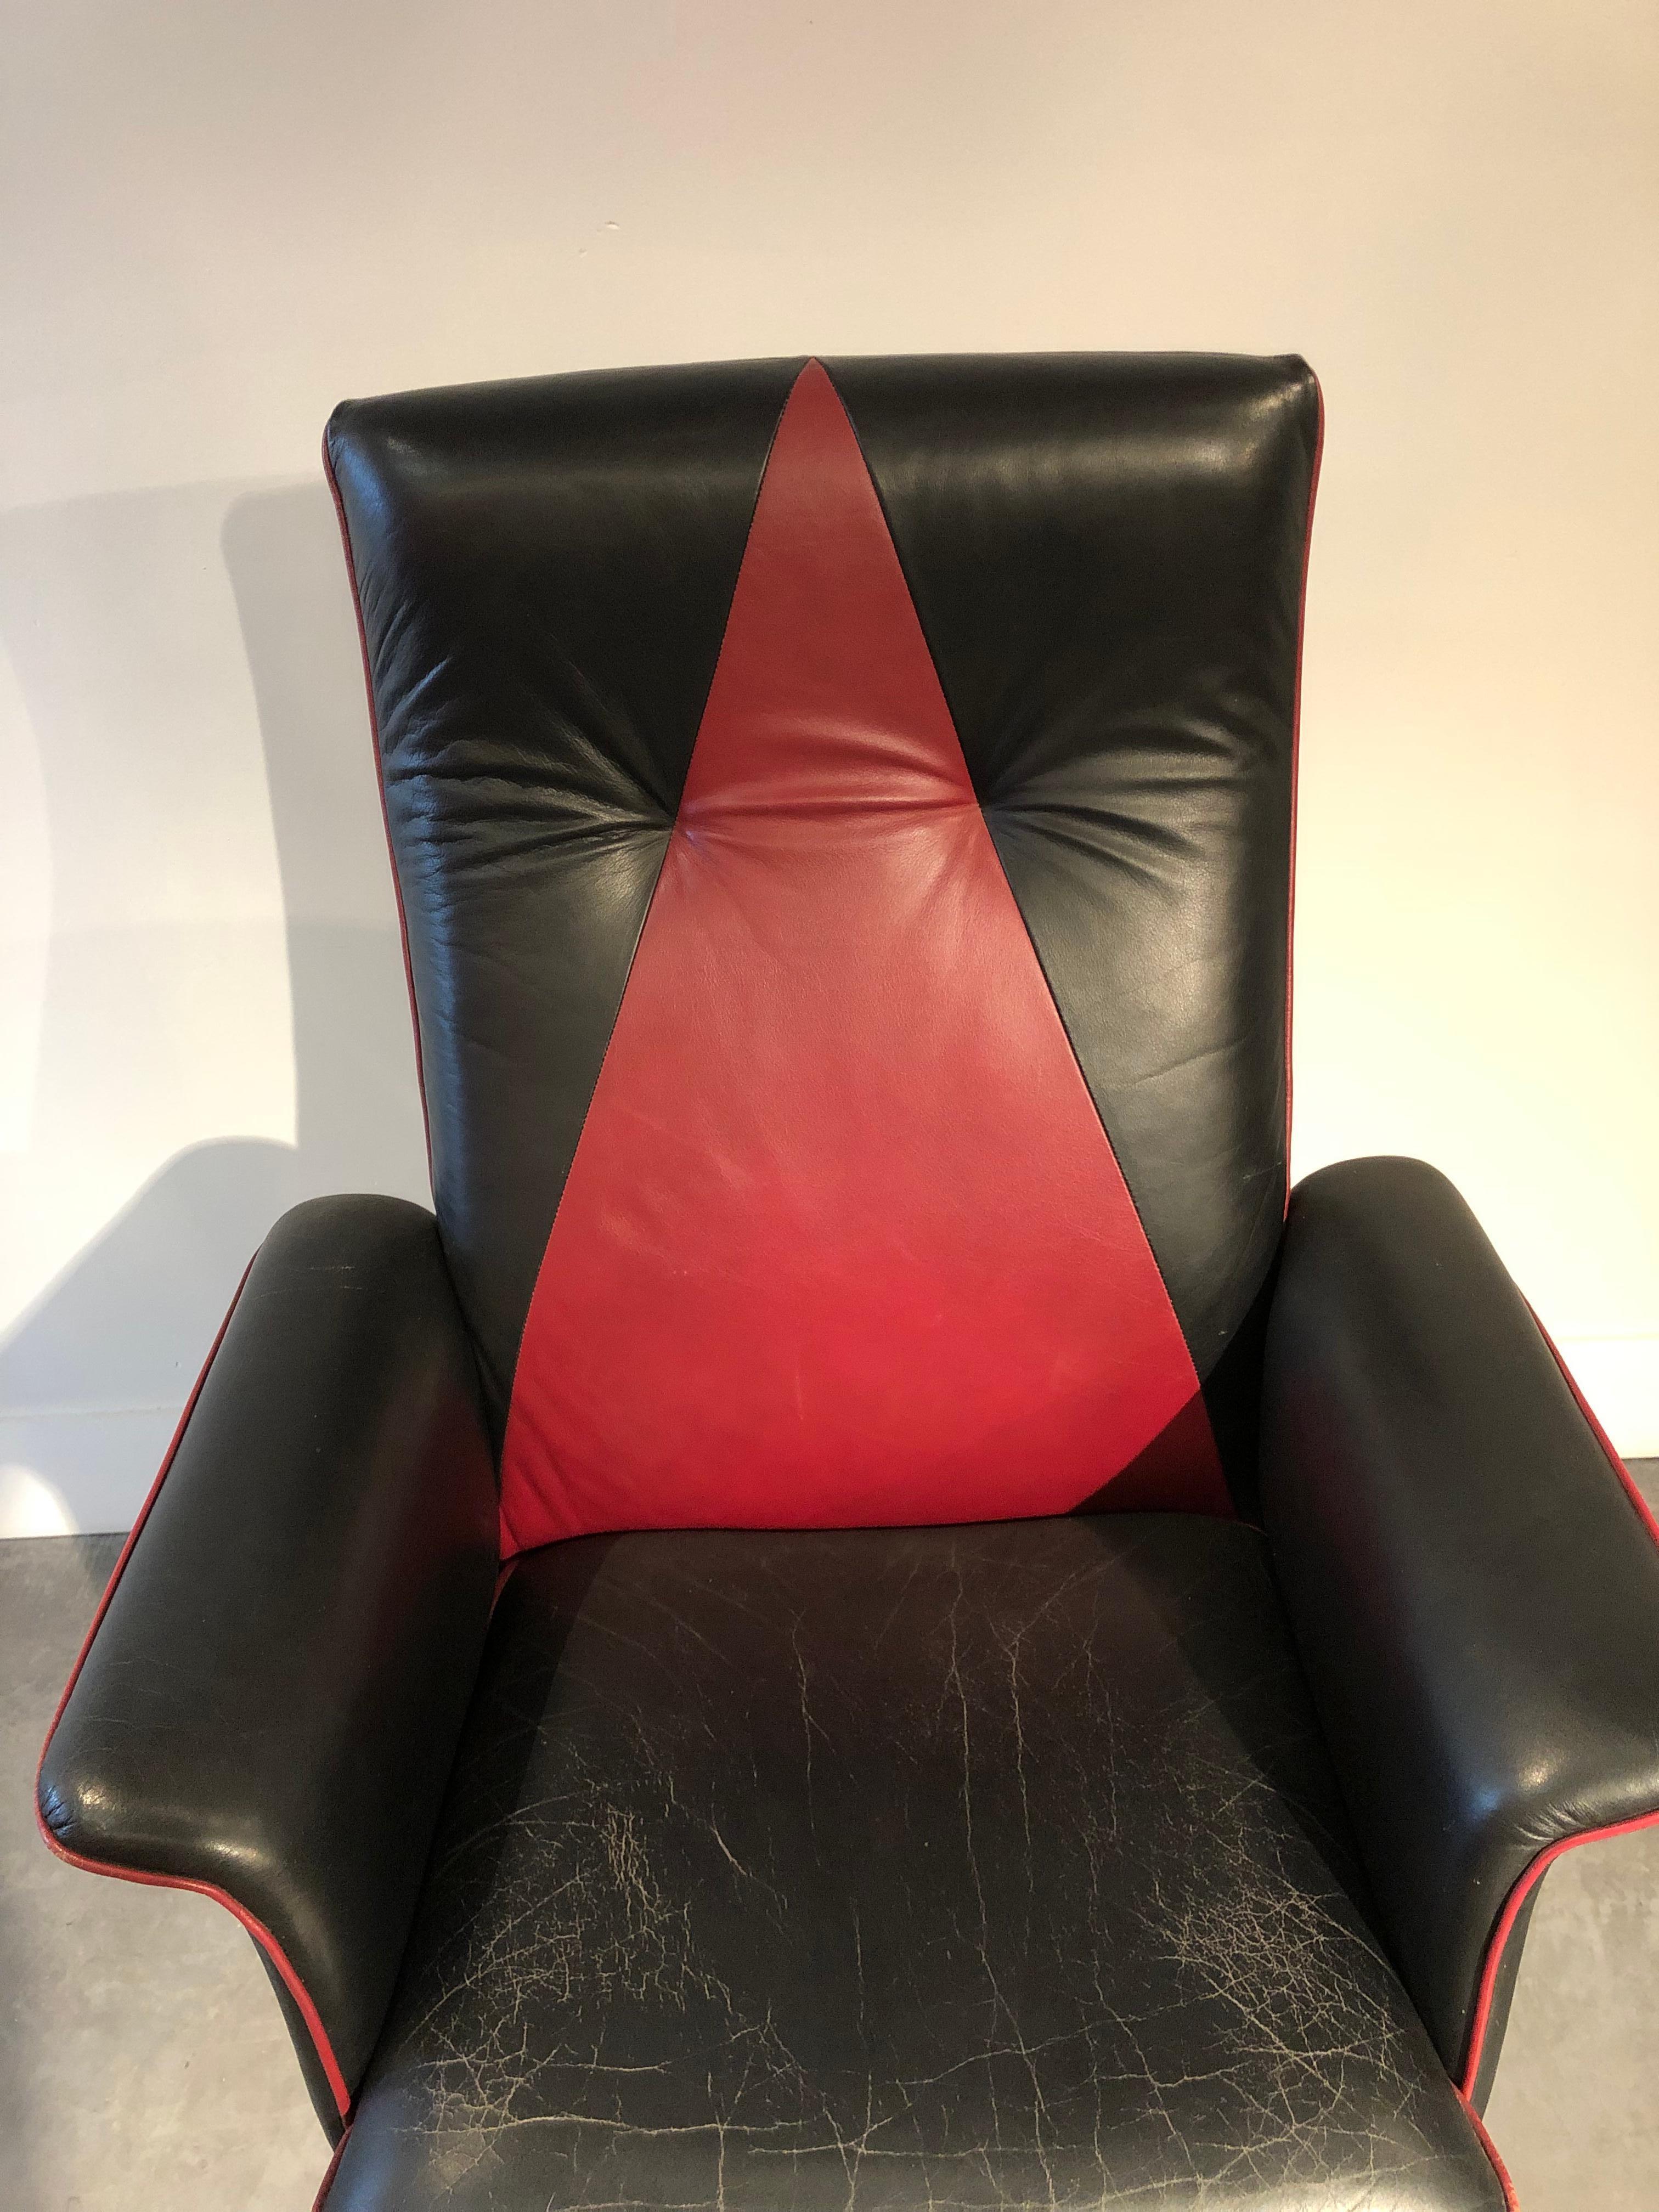 Leather swivel desk chair made for the pyramidal desk .
Made in fine leather but shows some traces of use on the seat part.
Better for me to sell with desk.